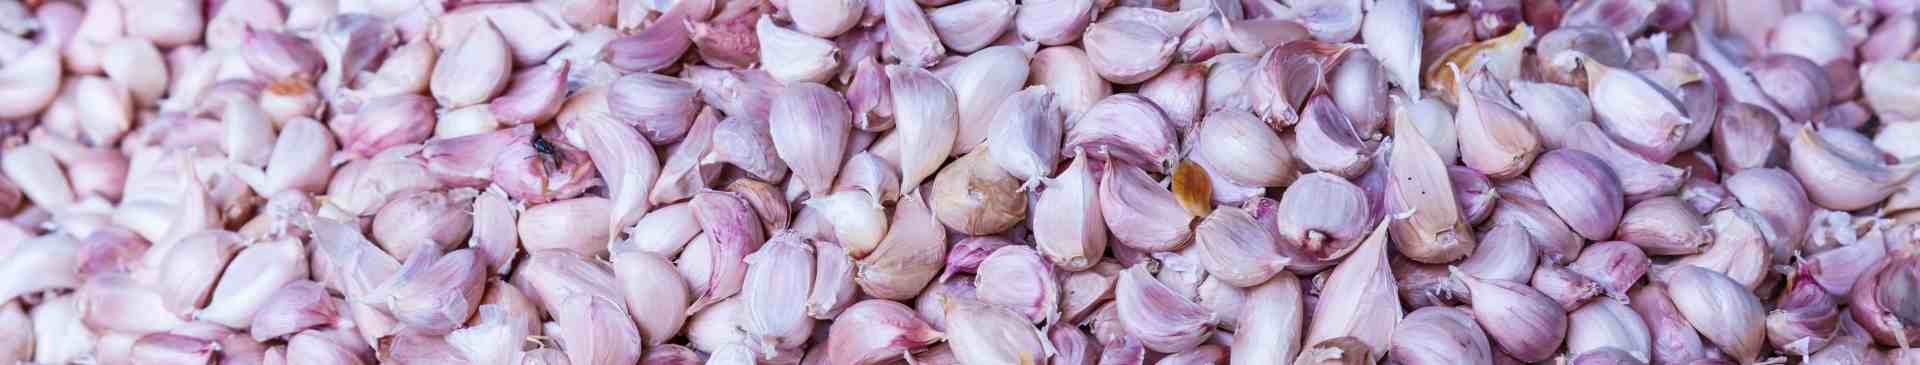 An Introduction to the Different Types of Garlic